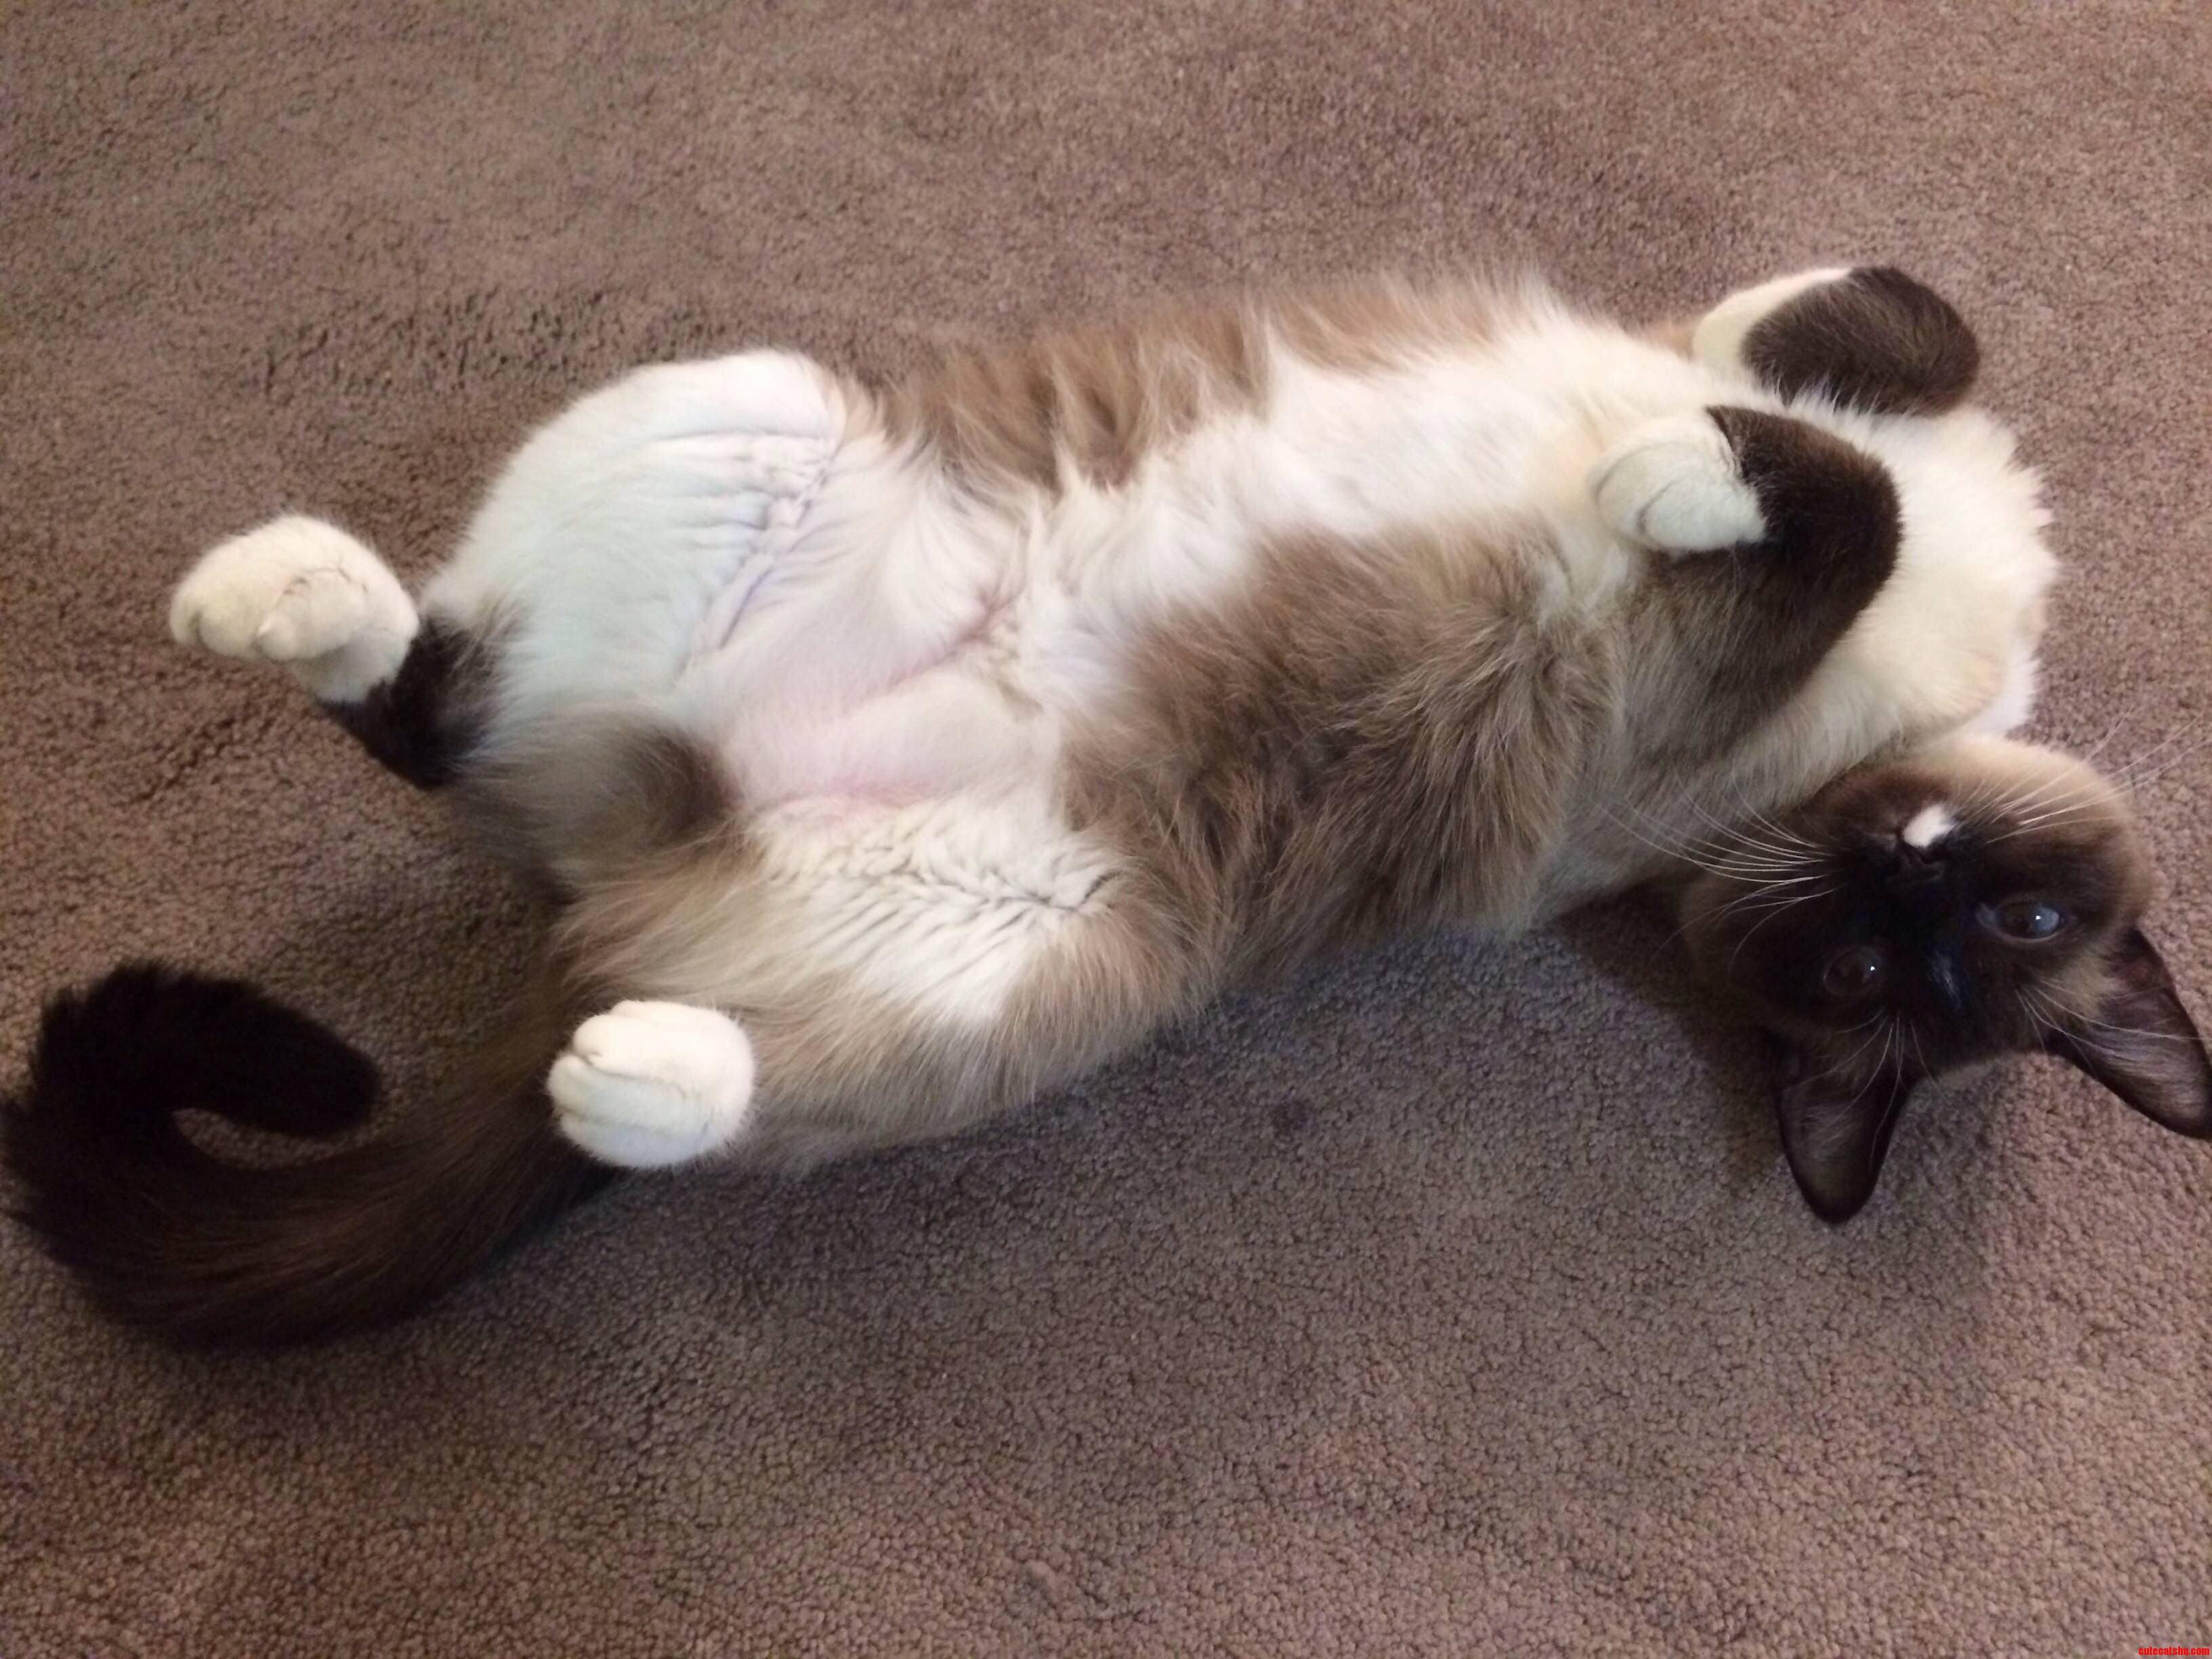 Put Down The Phone And Rub My Belly Dammit.